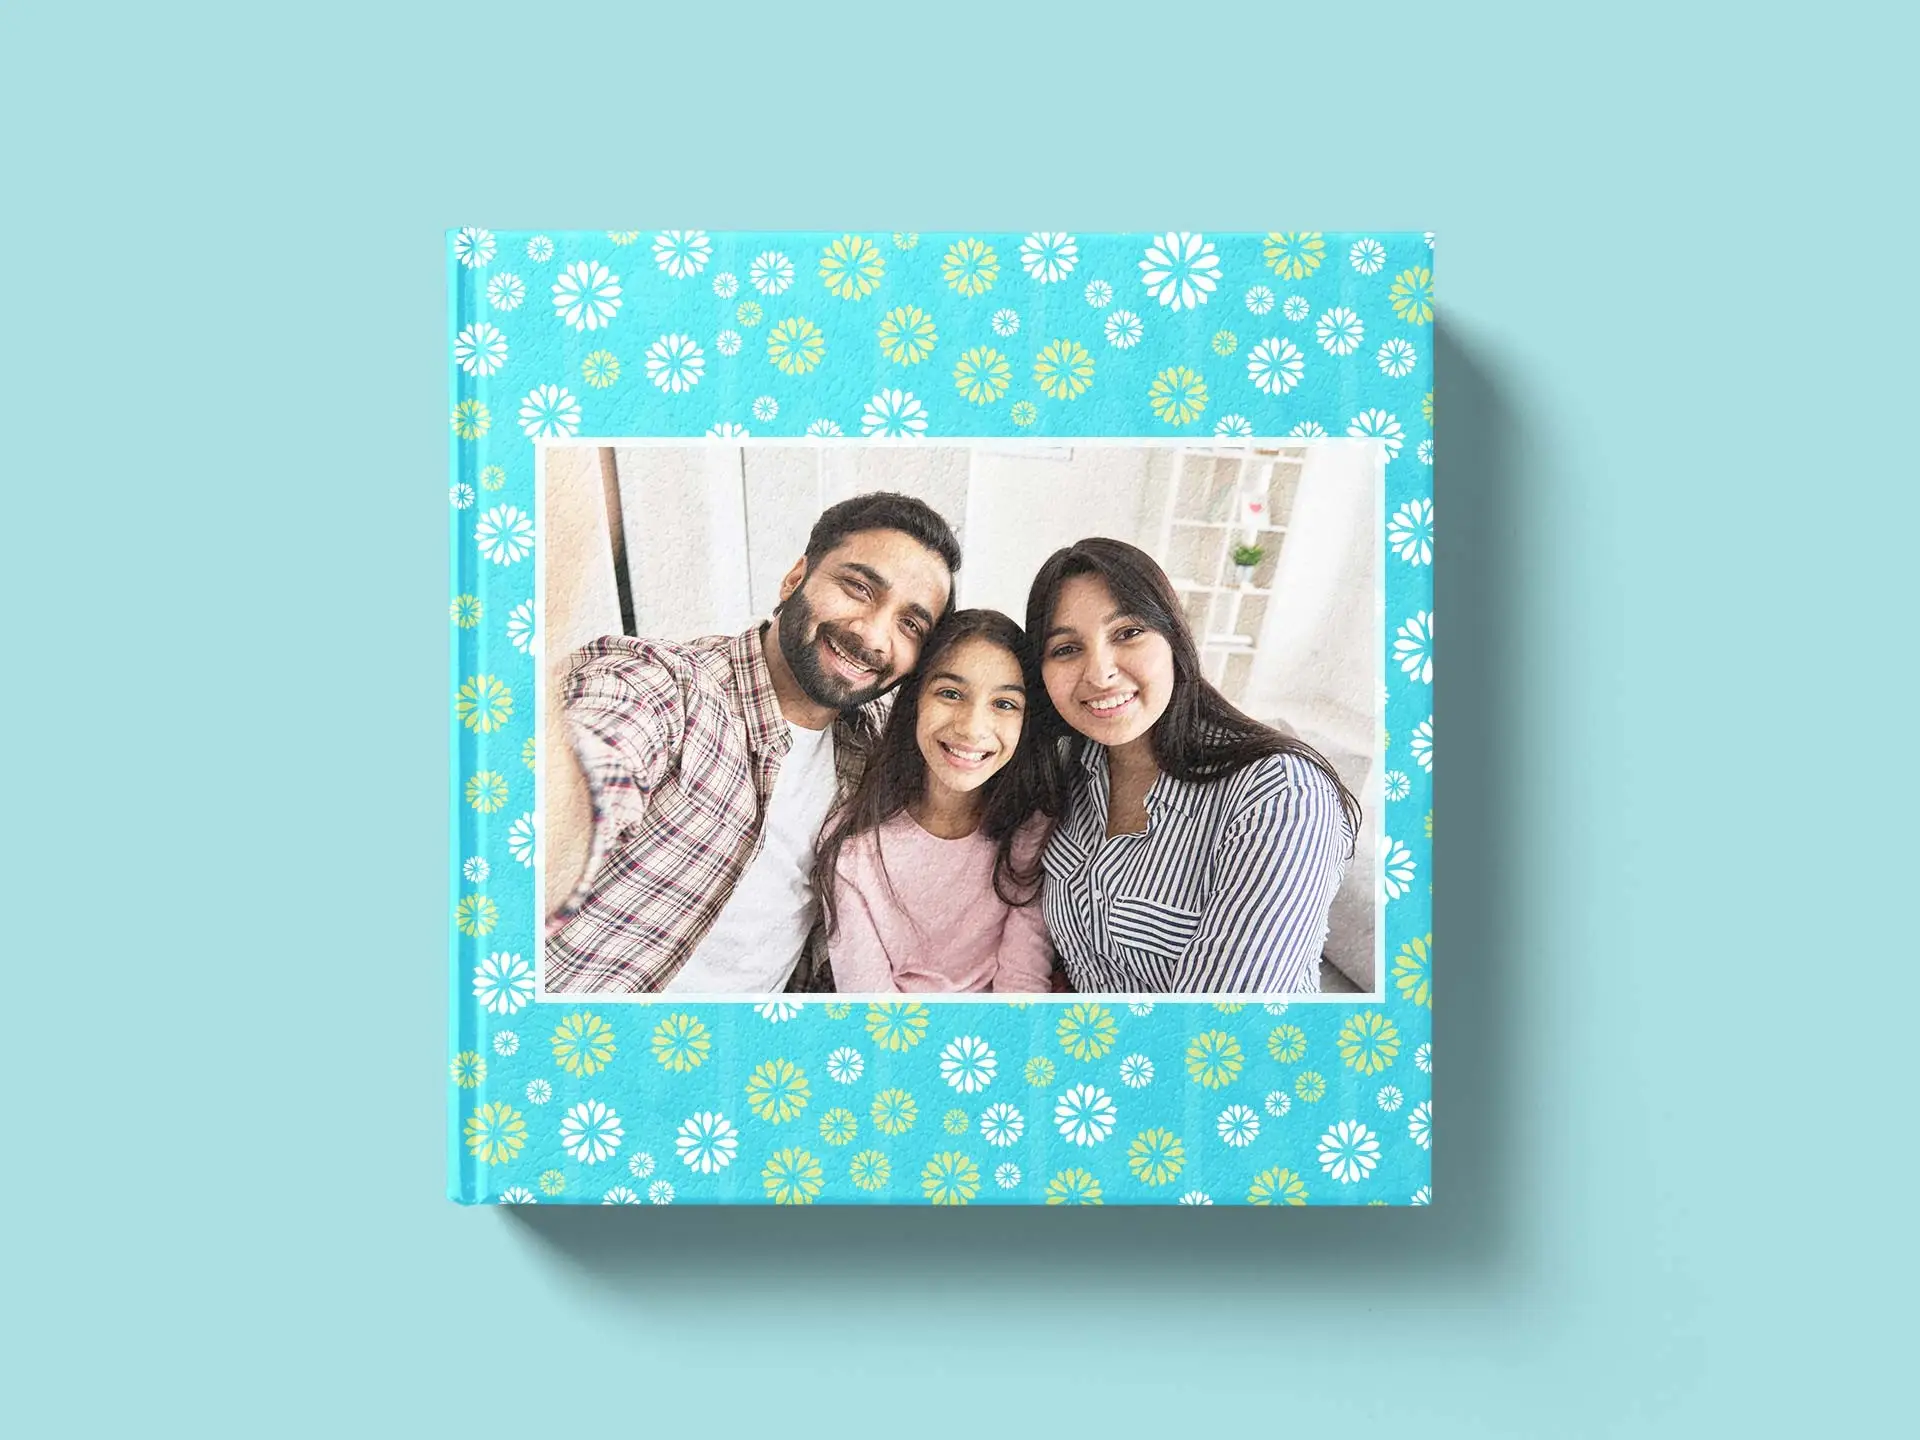 Personalized Family Memories Photo Book